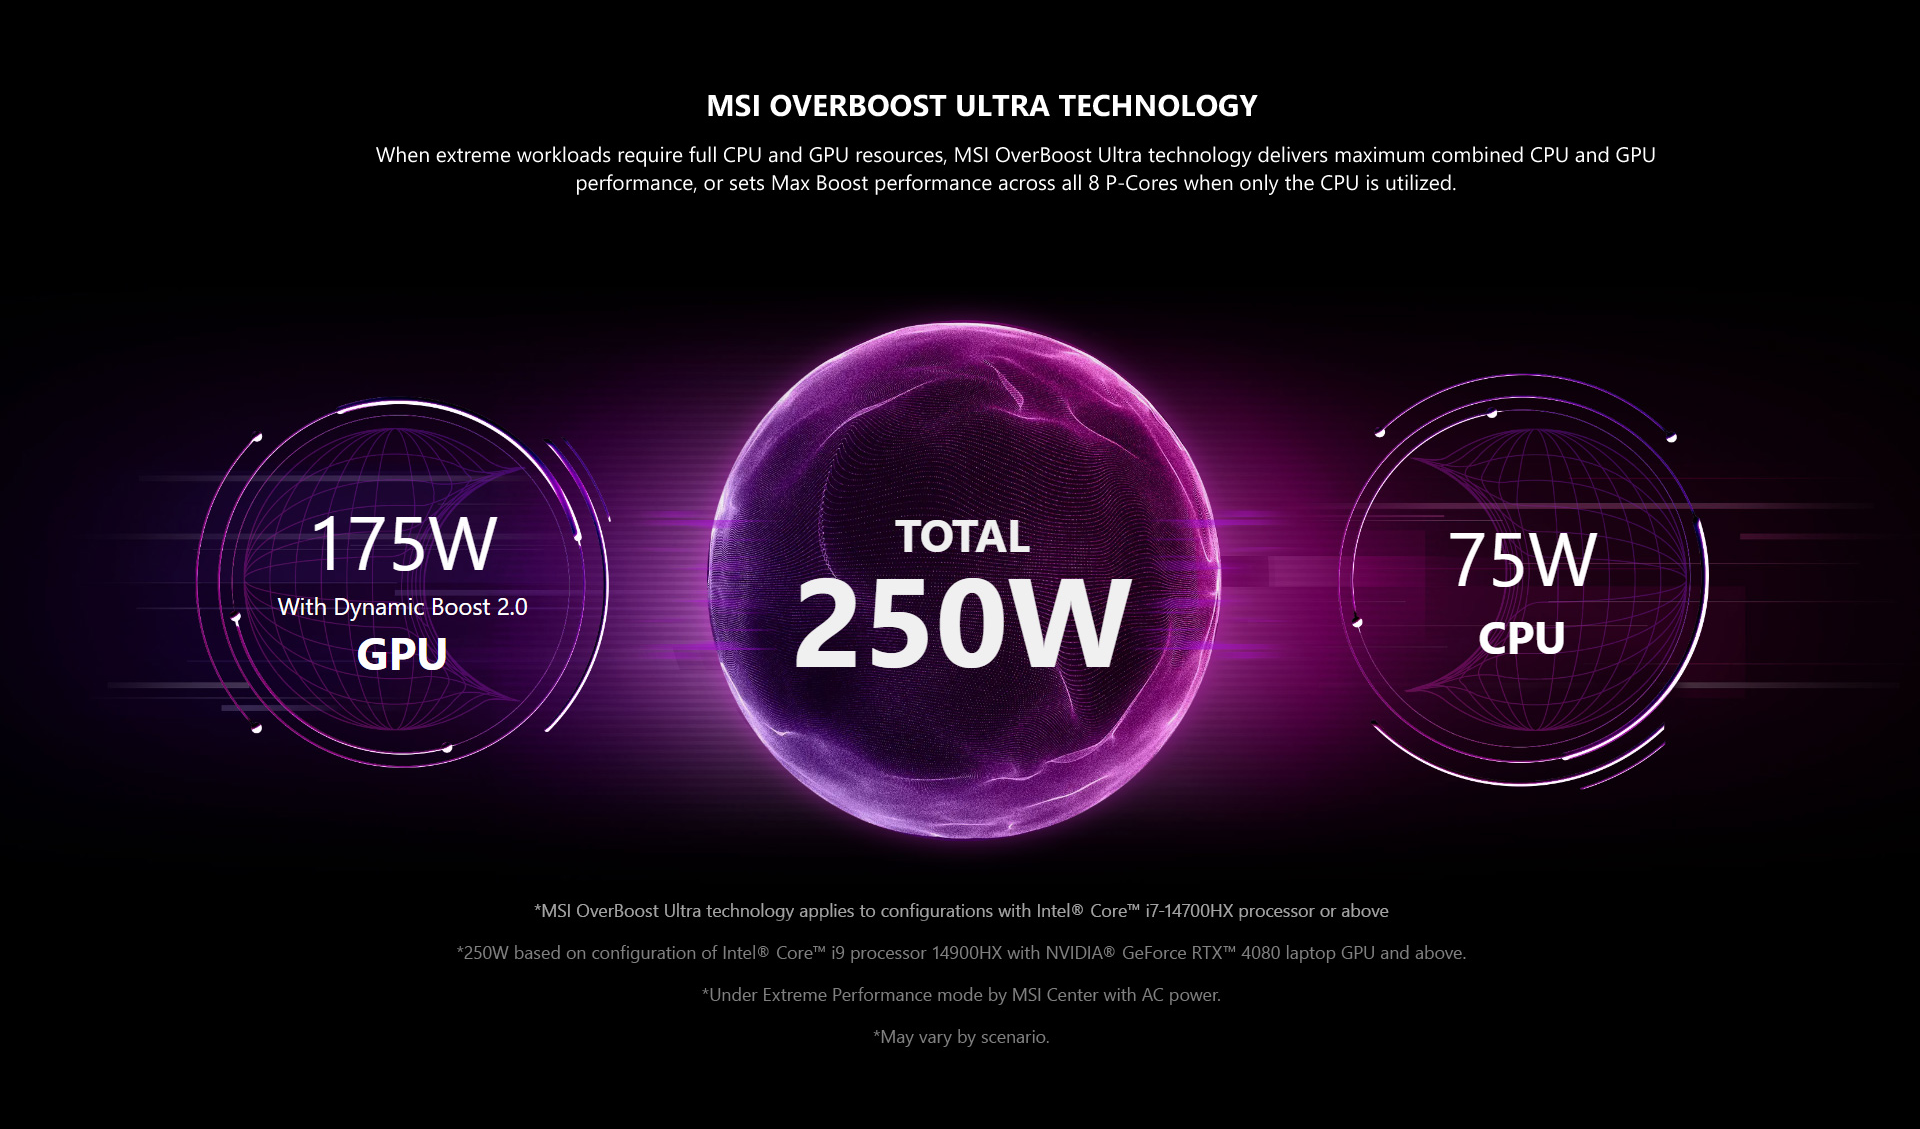 When extreme workloads require full CPU and GPU resources, MSI OverBoost Ultra technology delivers maximum combined CPU and GPU performance, or sets Max Boost performance across all 8 P-Cores when only the CPU is utilized.